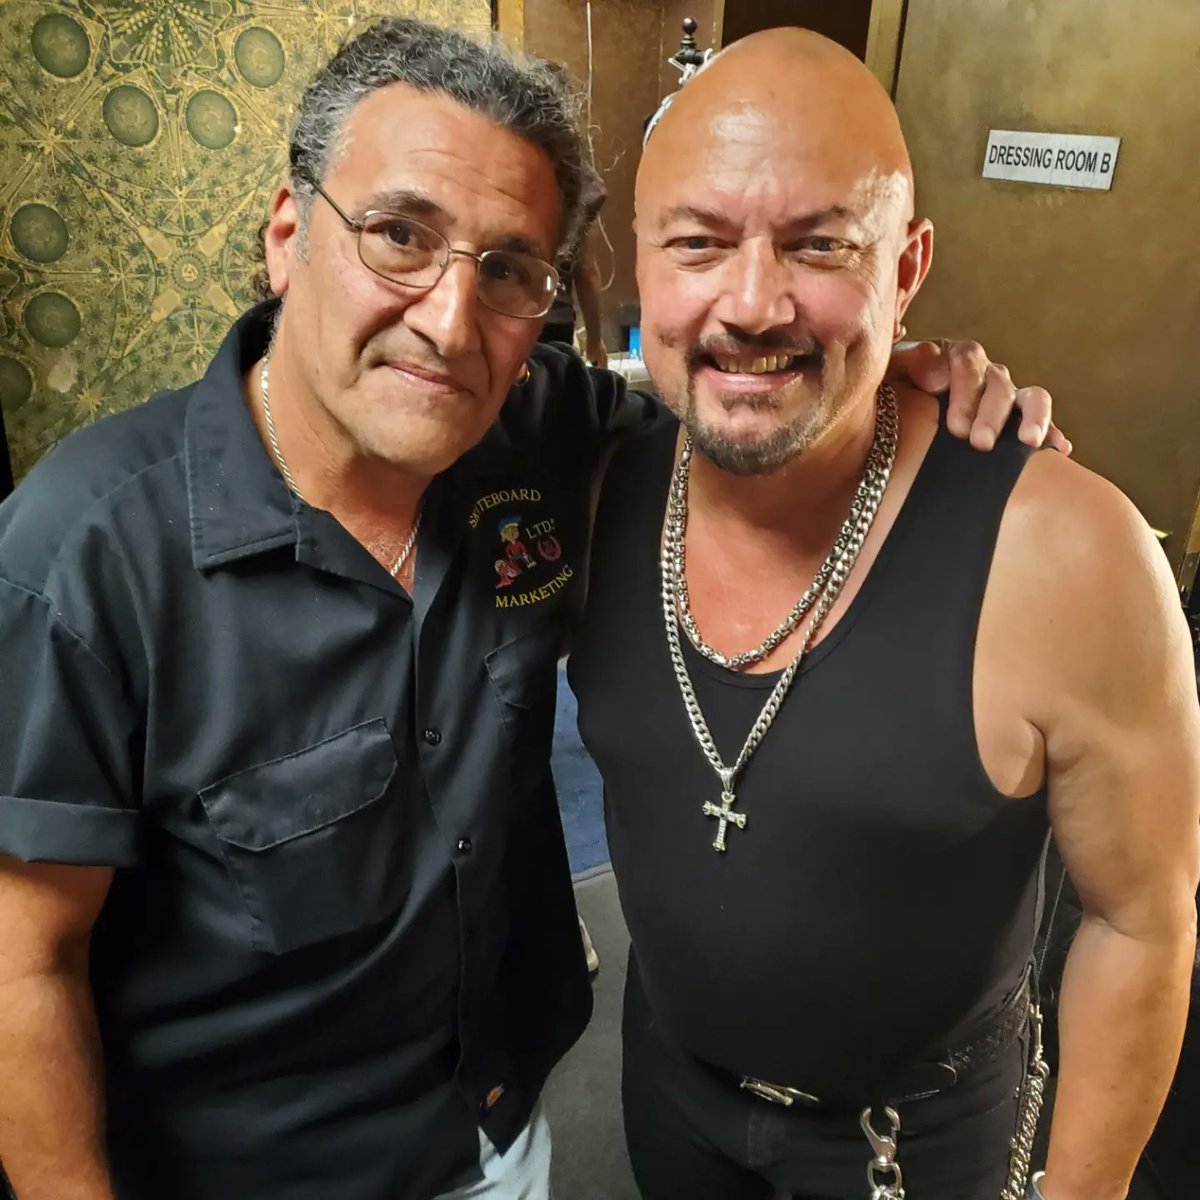 Great to have pre show #hangtime with @geofftate @SonyHall the show was amazing as always. He's an absolute pleasure to work with. @Metalcontraband #munseyricci #drjeckleneverhides #geofftate #susantate #operationmindcrime #thebigrockshow